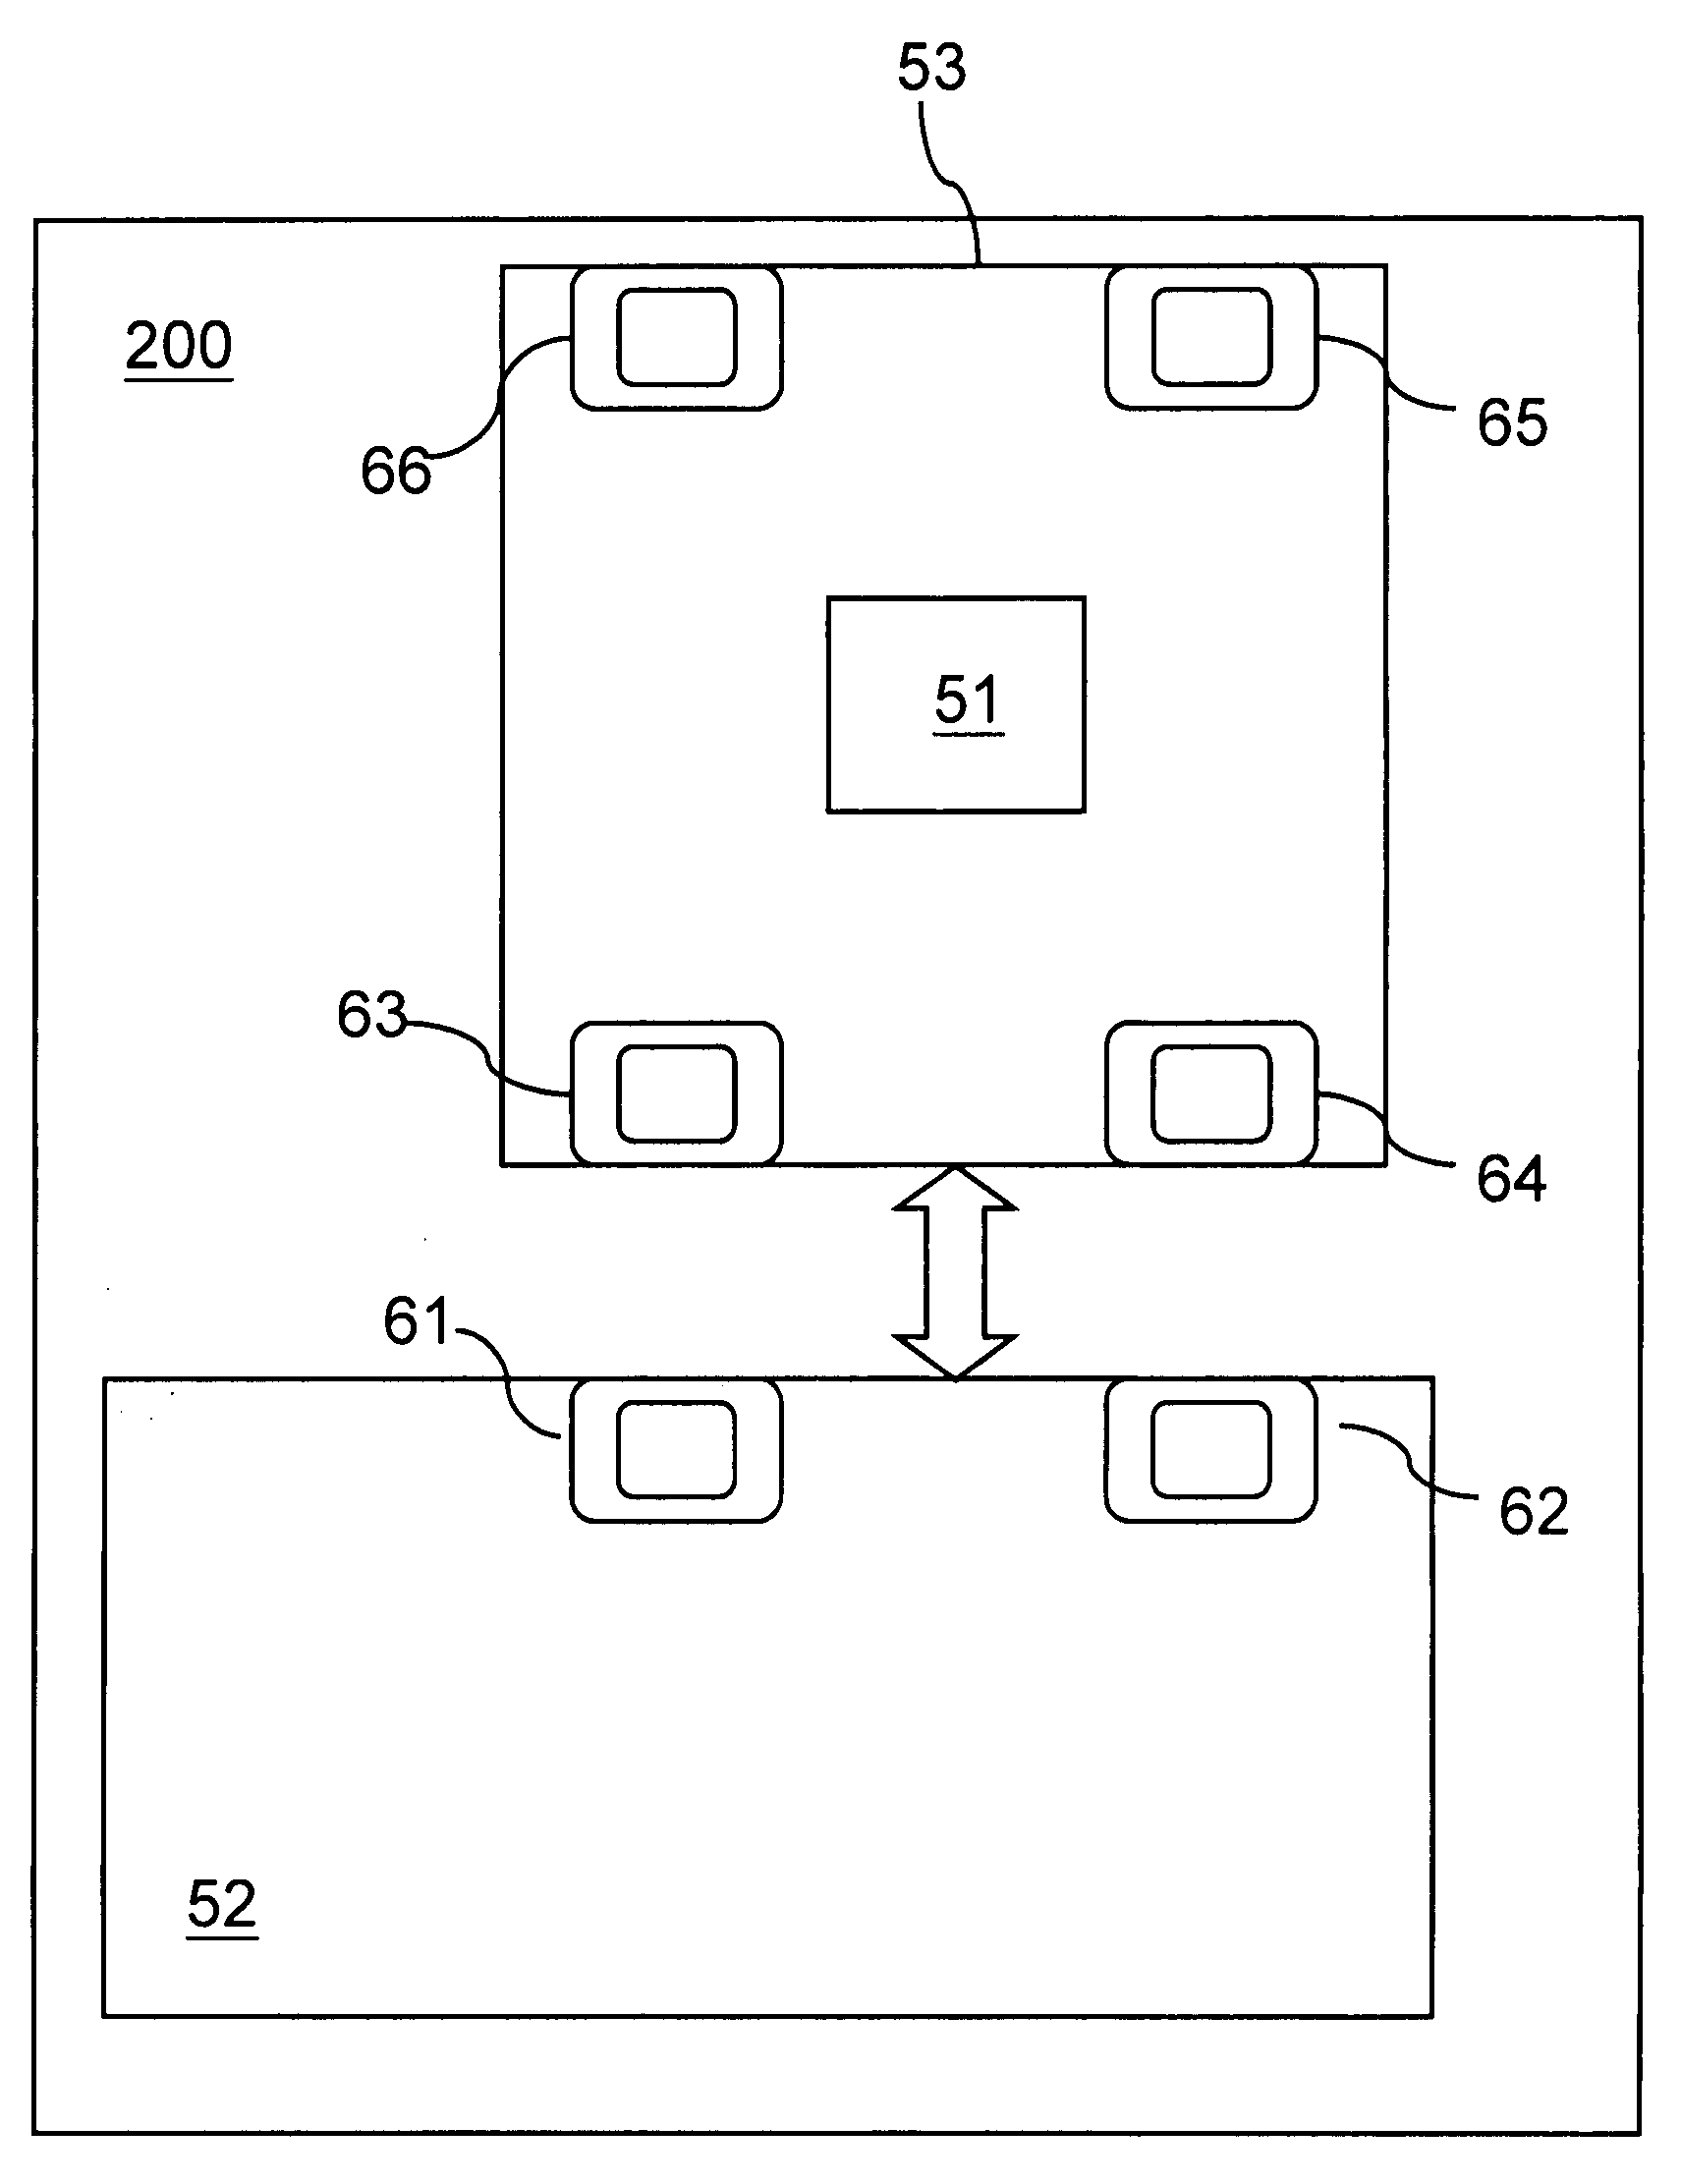 Accessory-testing device and method therefor